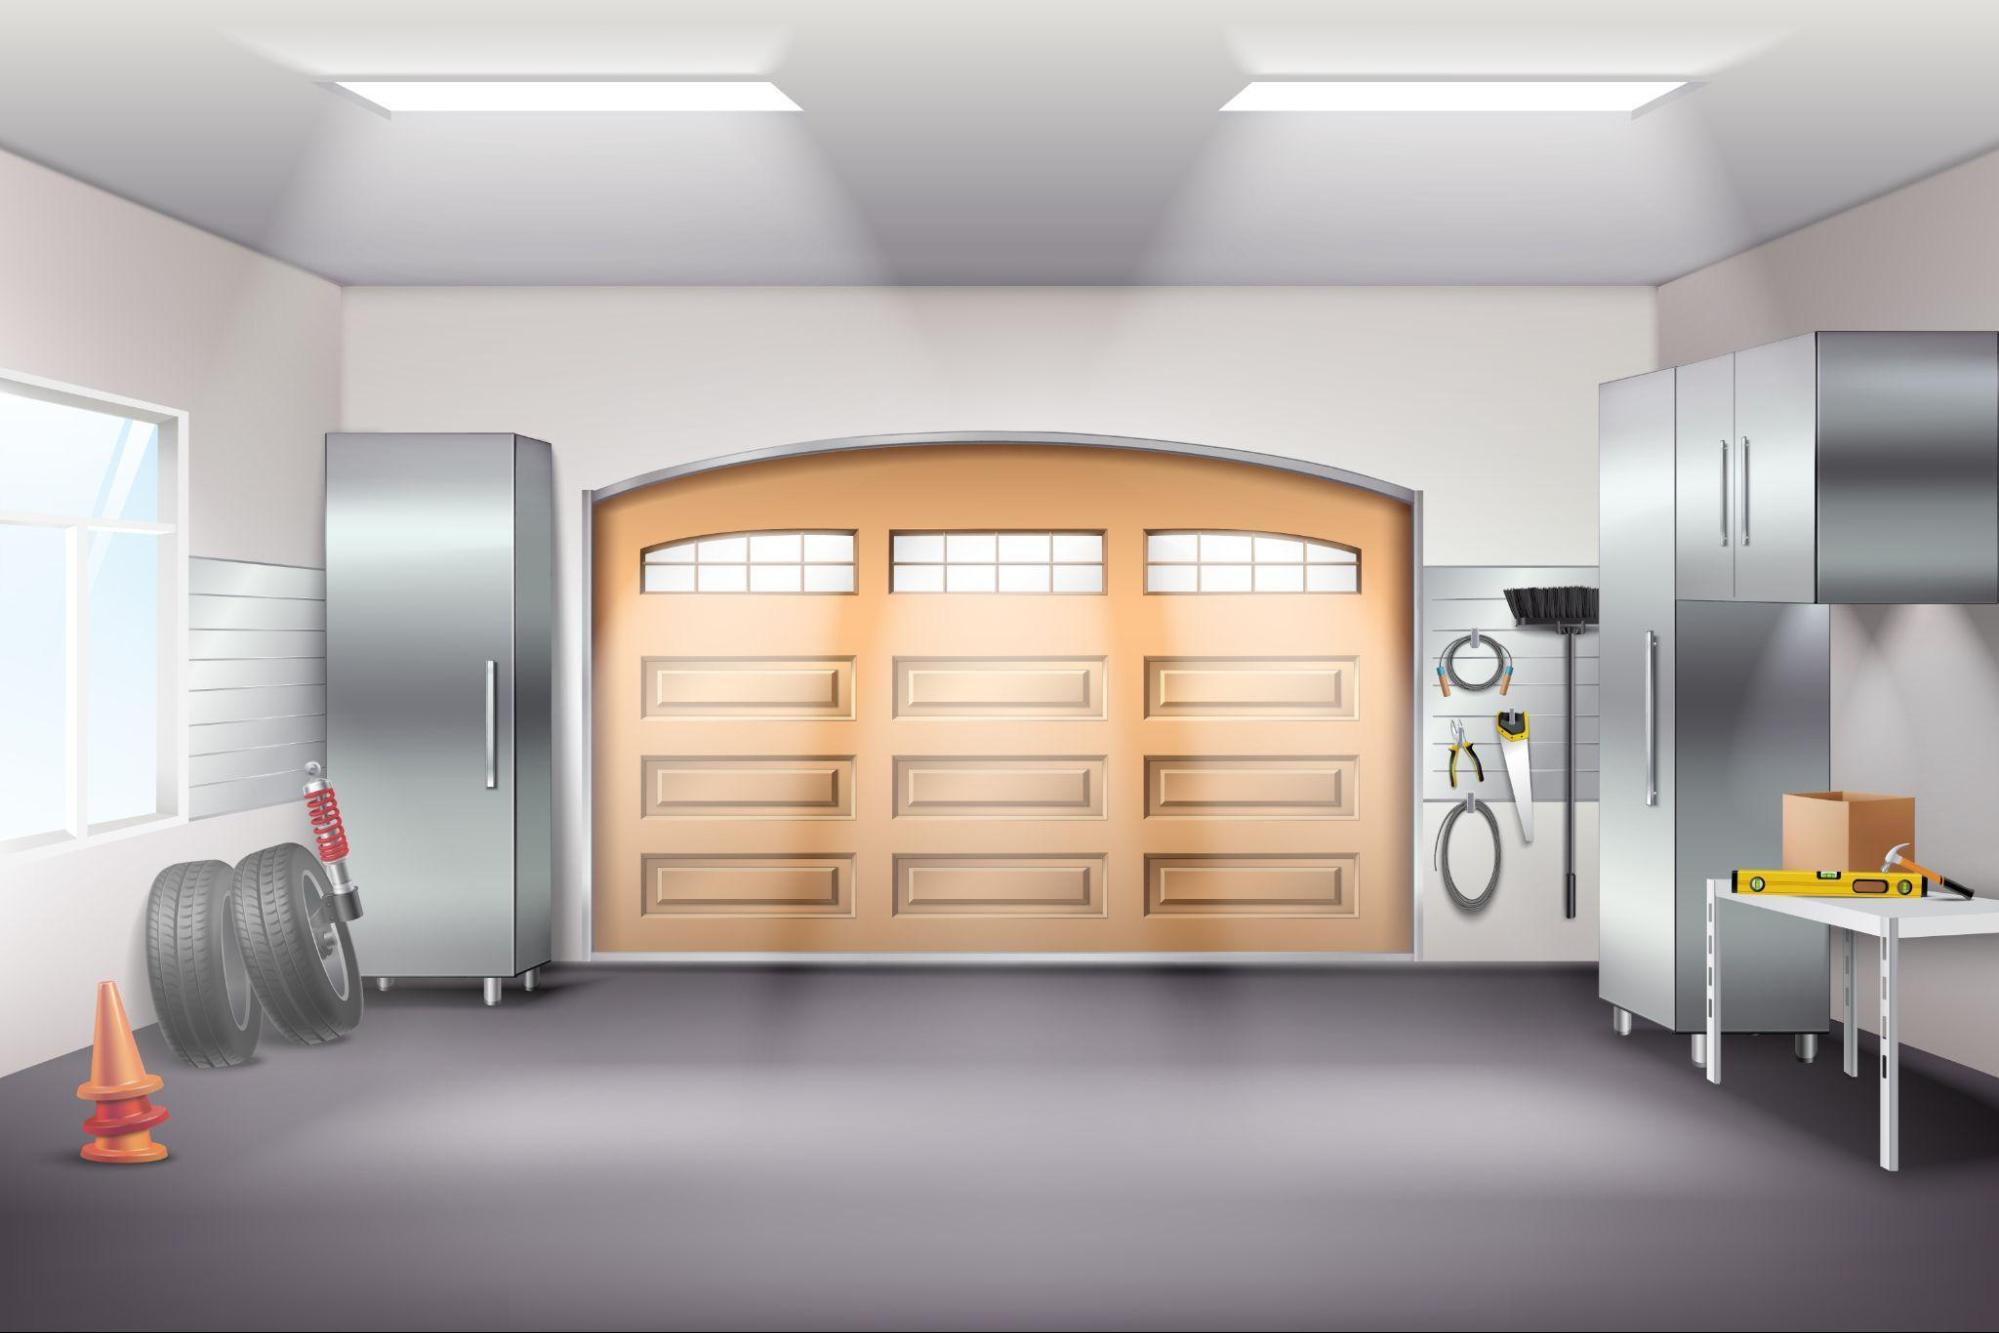 An illustration of a garage with an organized door and tire.